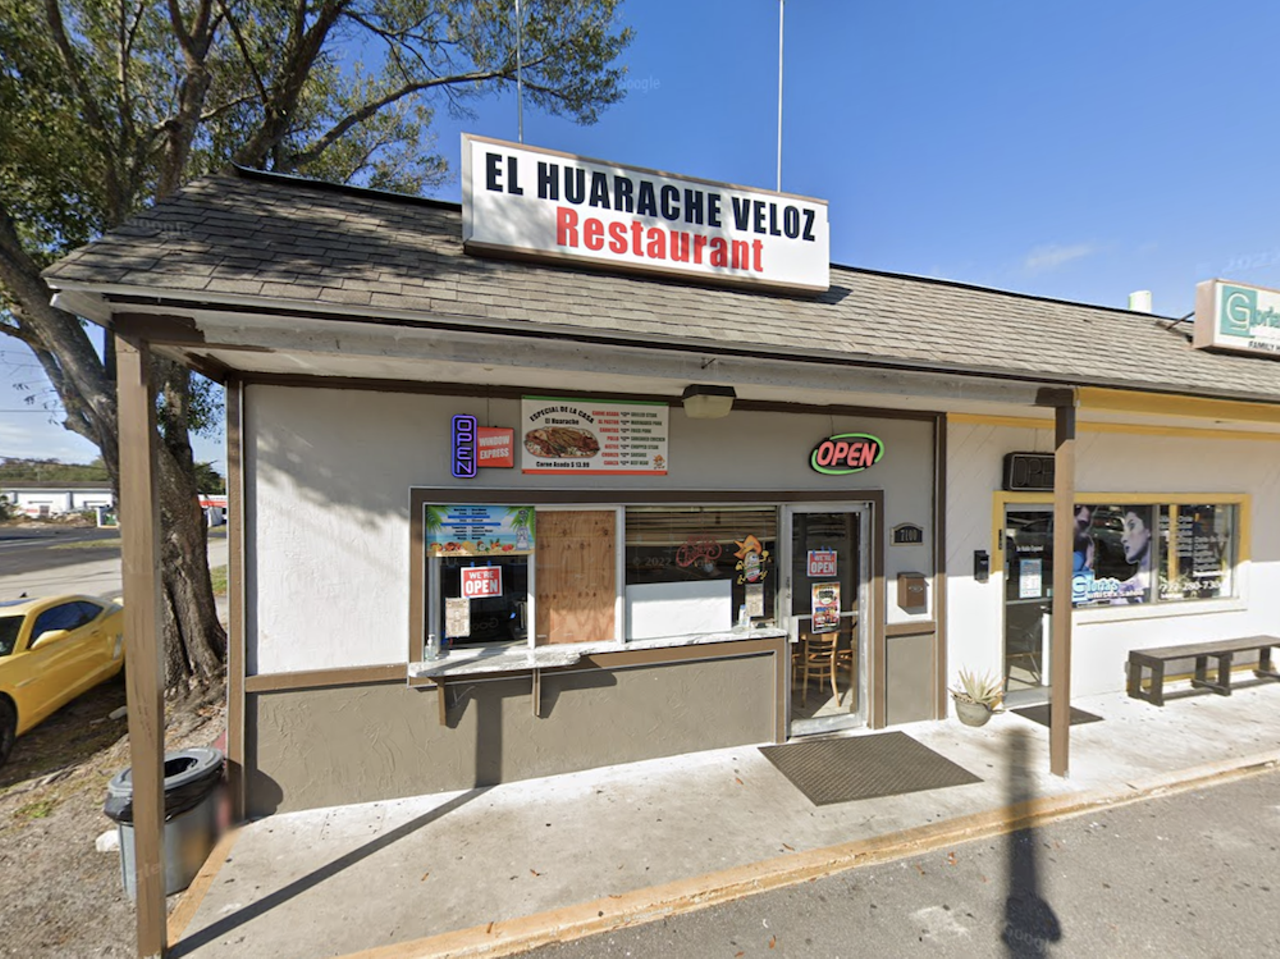 El Huarache Veloz
7100 49th St N, Pinellas Park, 727-525-6028
A strip mall in Pinellas Park is where this restaurant makes its home. Big plates of hearty authentic eats await inside its doors or at the carryout window.
Photo via Google Maps